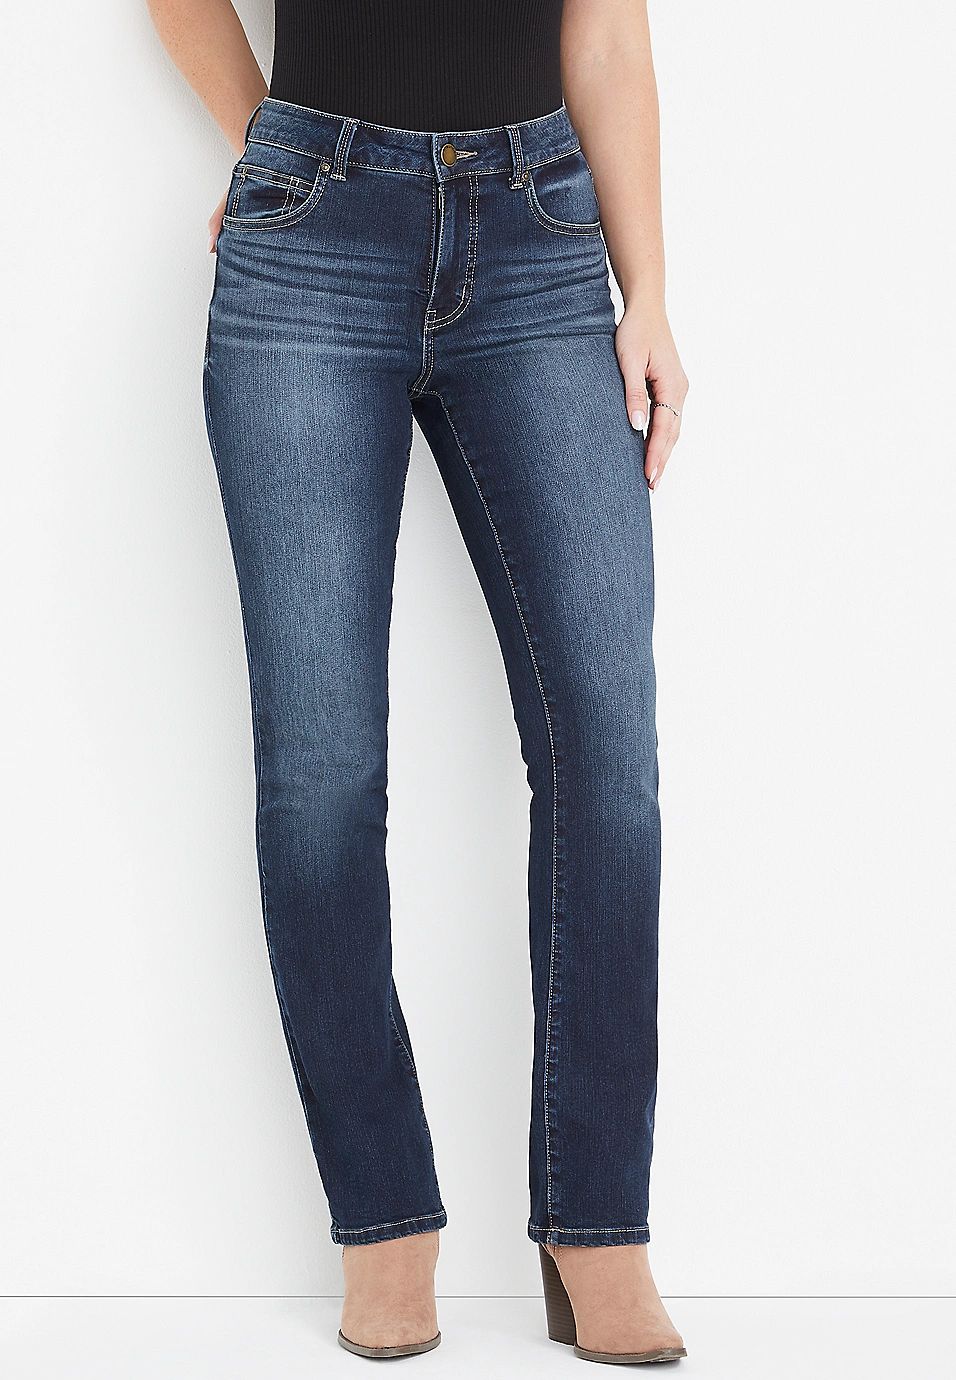 m jeans by maurices™ Everflex™ Straight Curvy High Rise Jean | Maurices